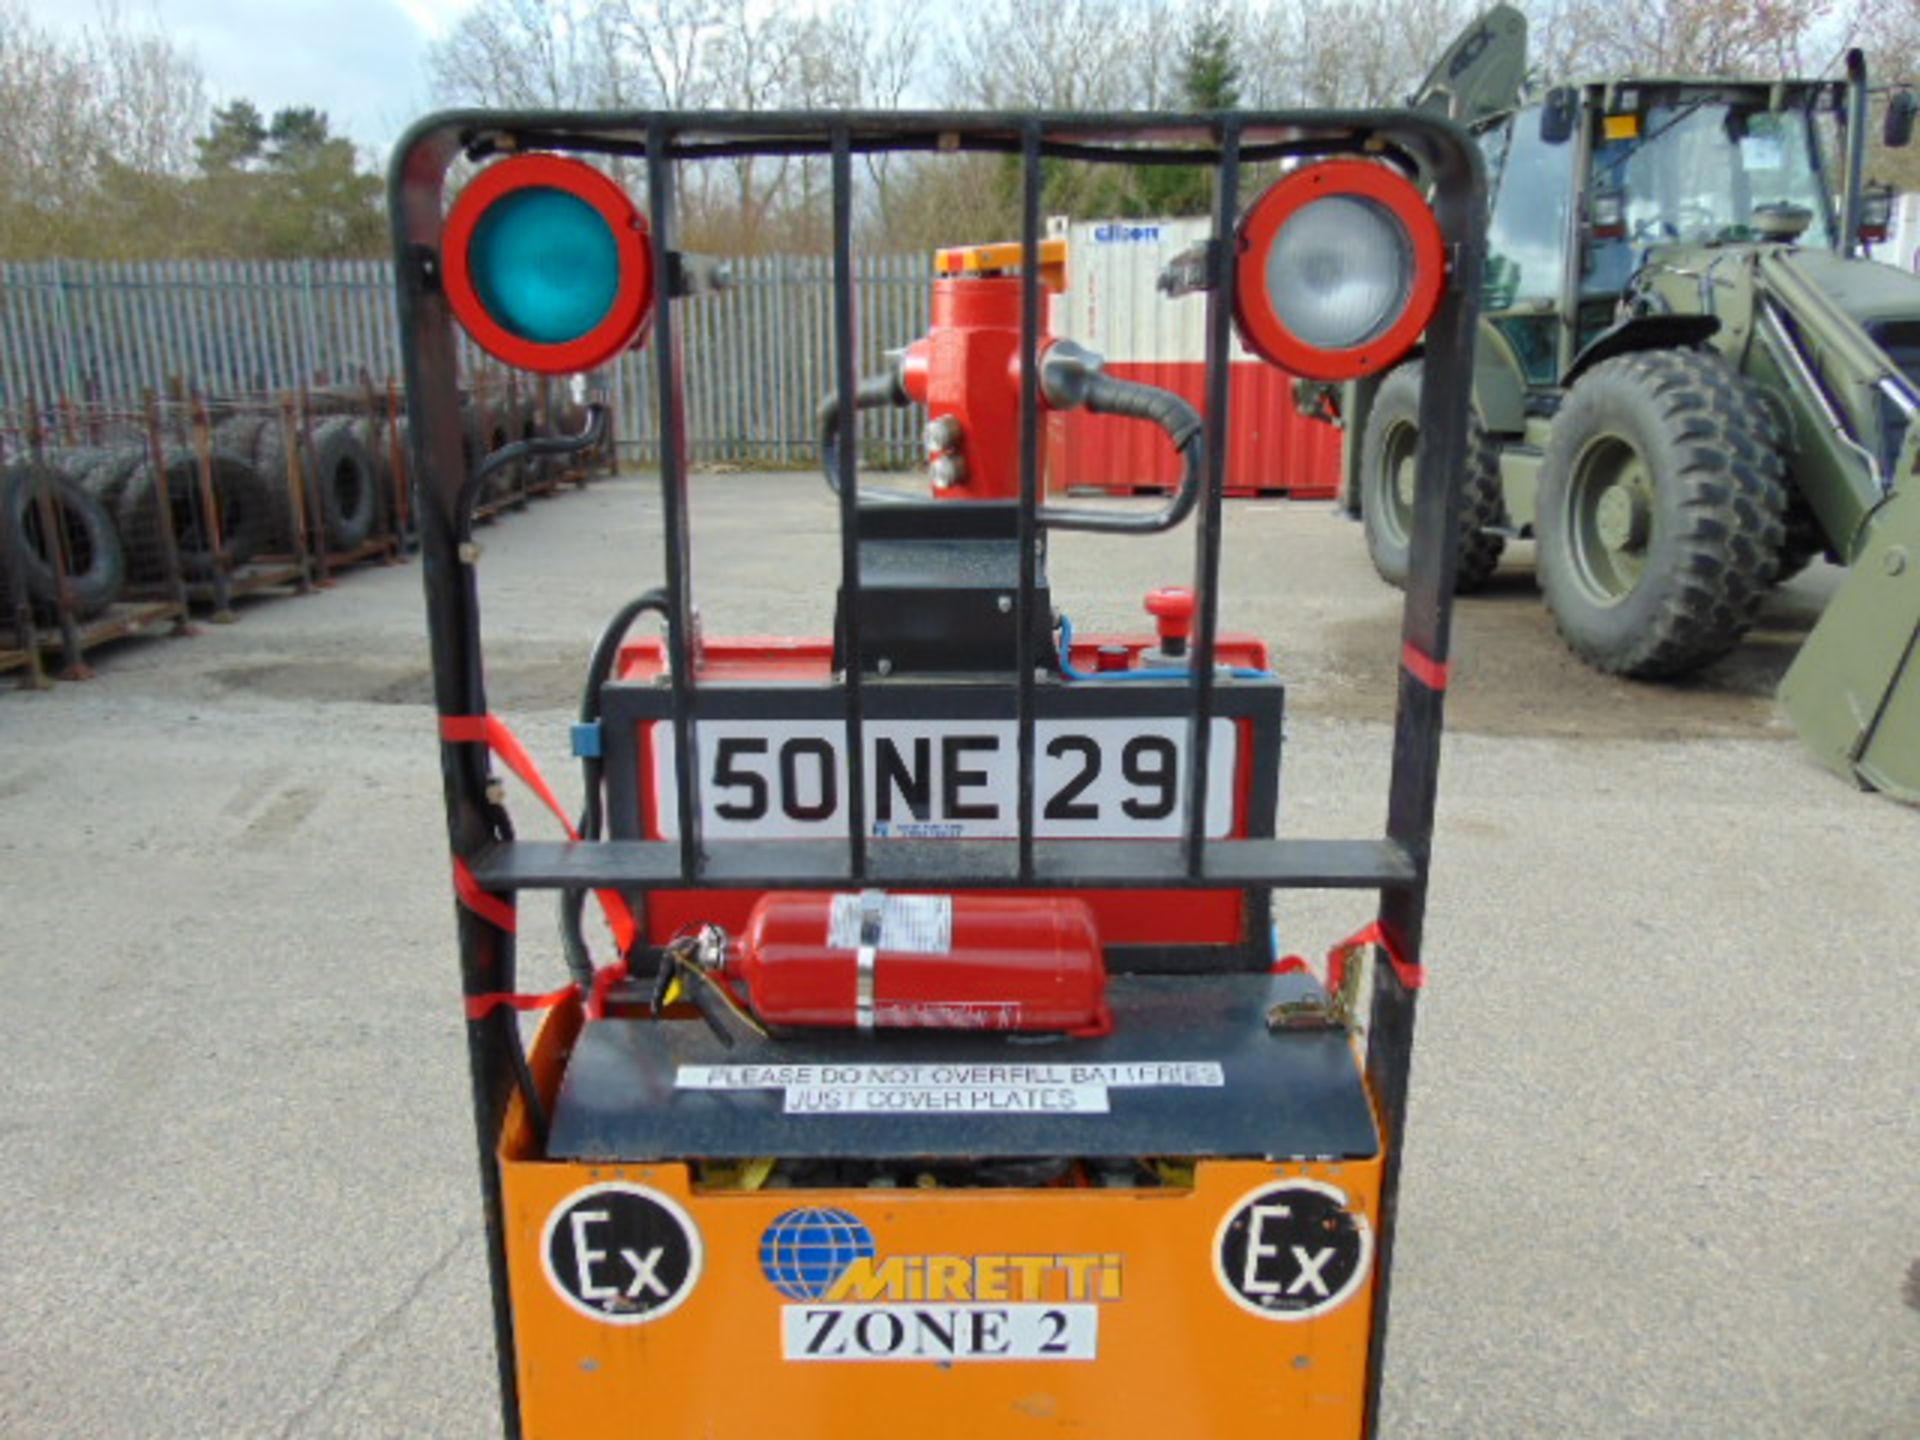 Still EGU 20 Class C, Zone 2 Protected Electric Powered Pallet Truck - Image 3 of 8